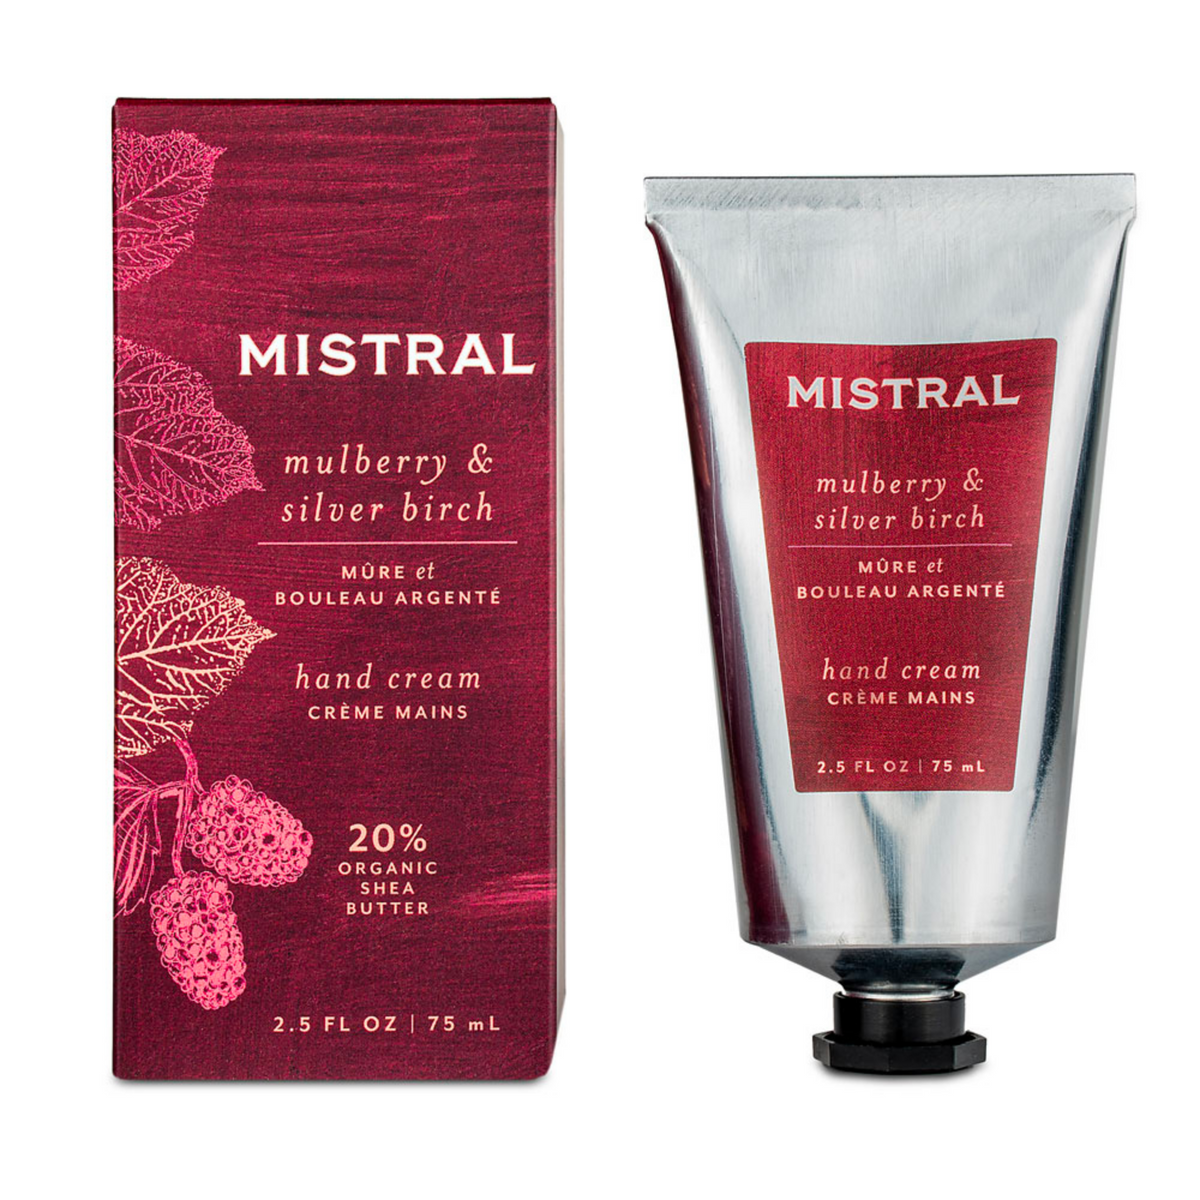 Primary Image of Mulberry and Silver Birch Hand Cream